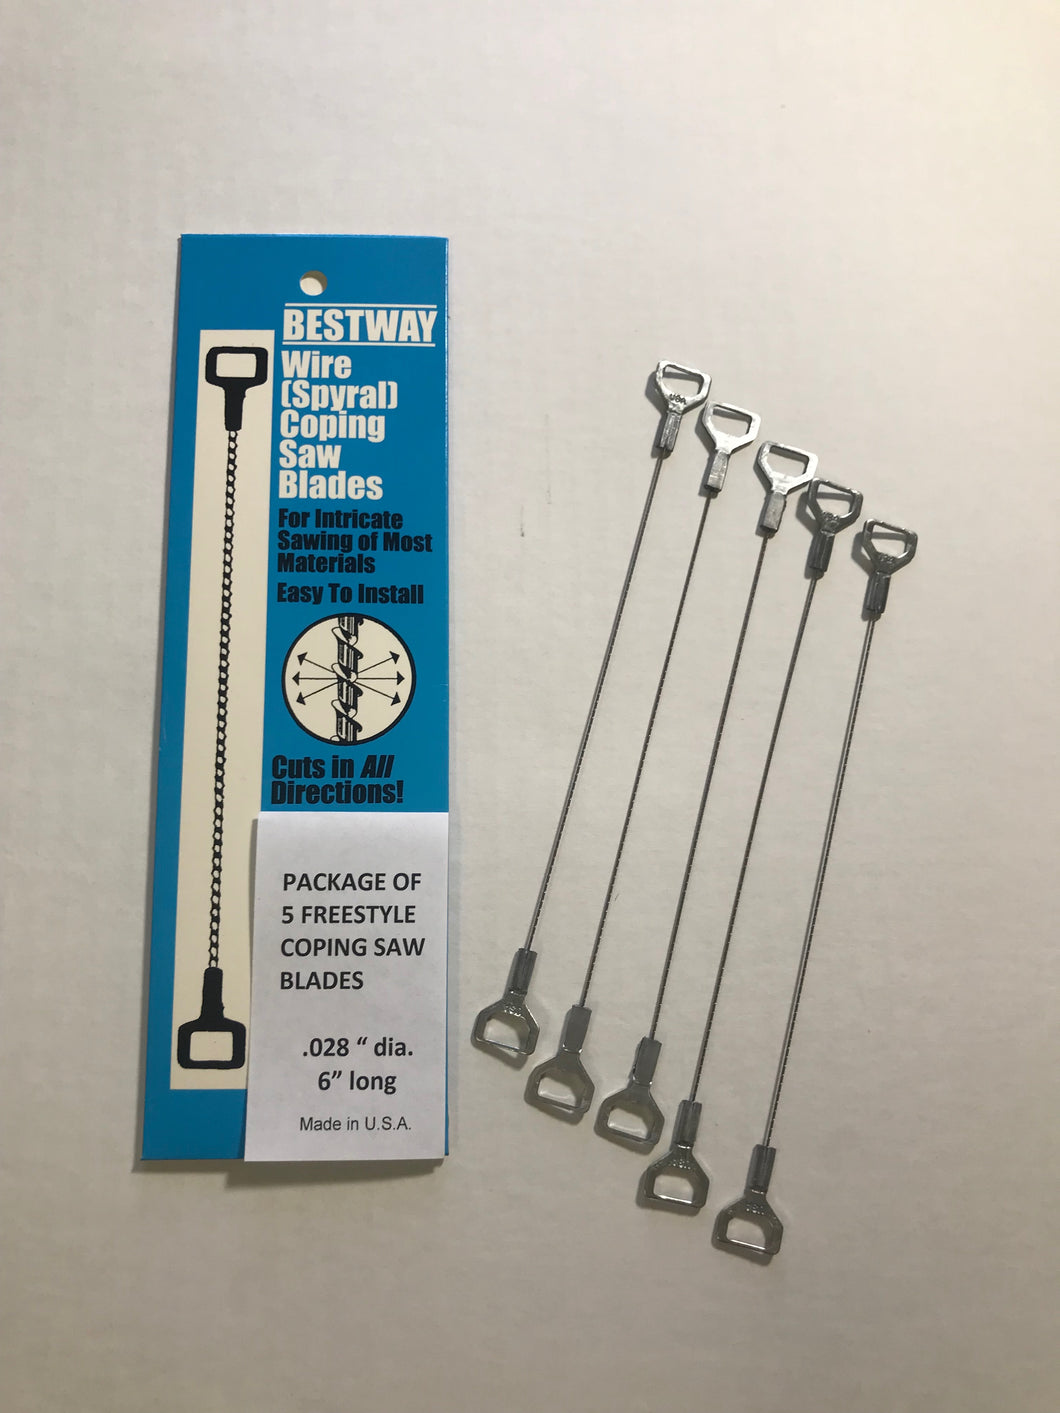 Freestyle Coping Saw Blades (5 Pack)